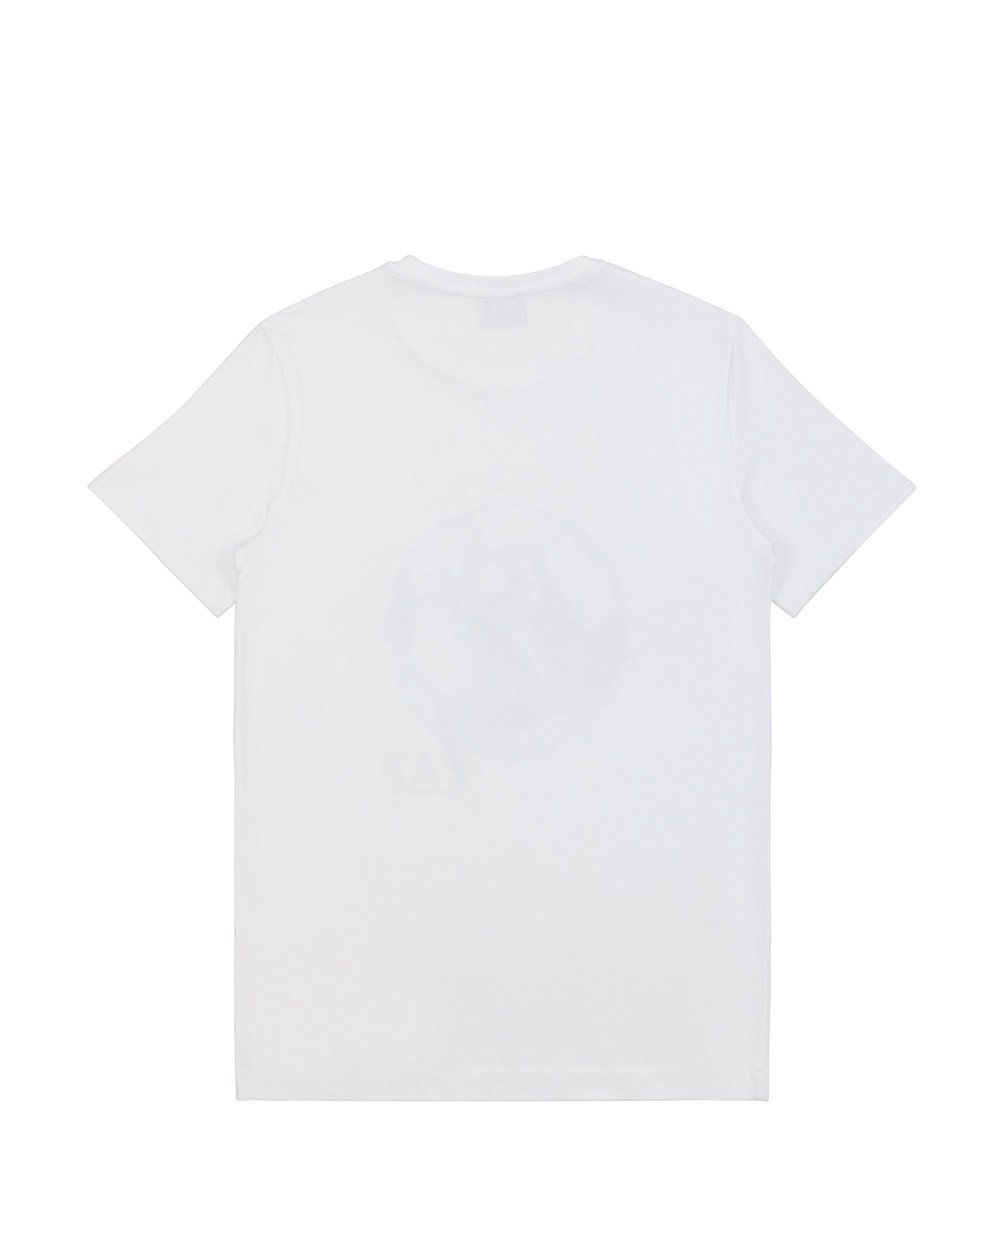 Cotton Short-Sleeves T-Shirt - ISSI Outlet